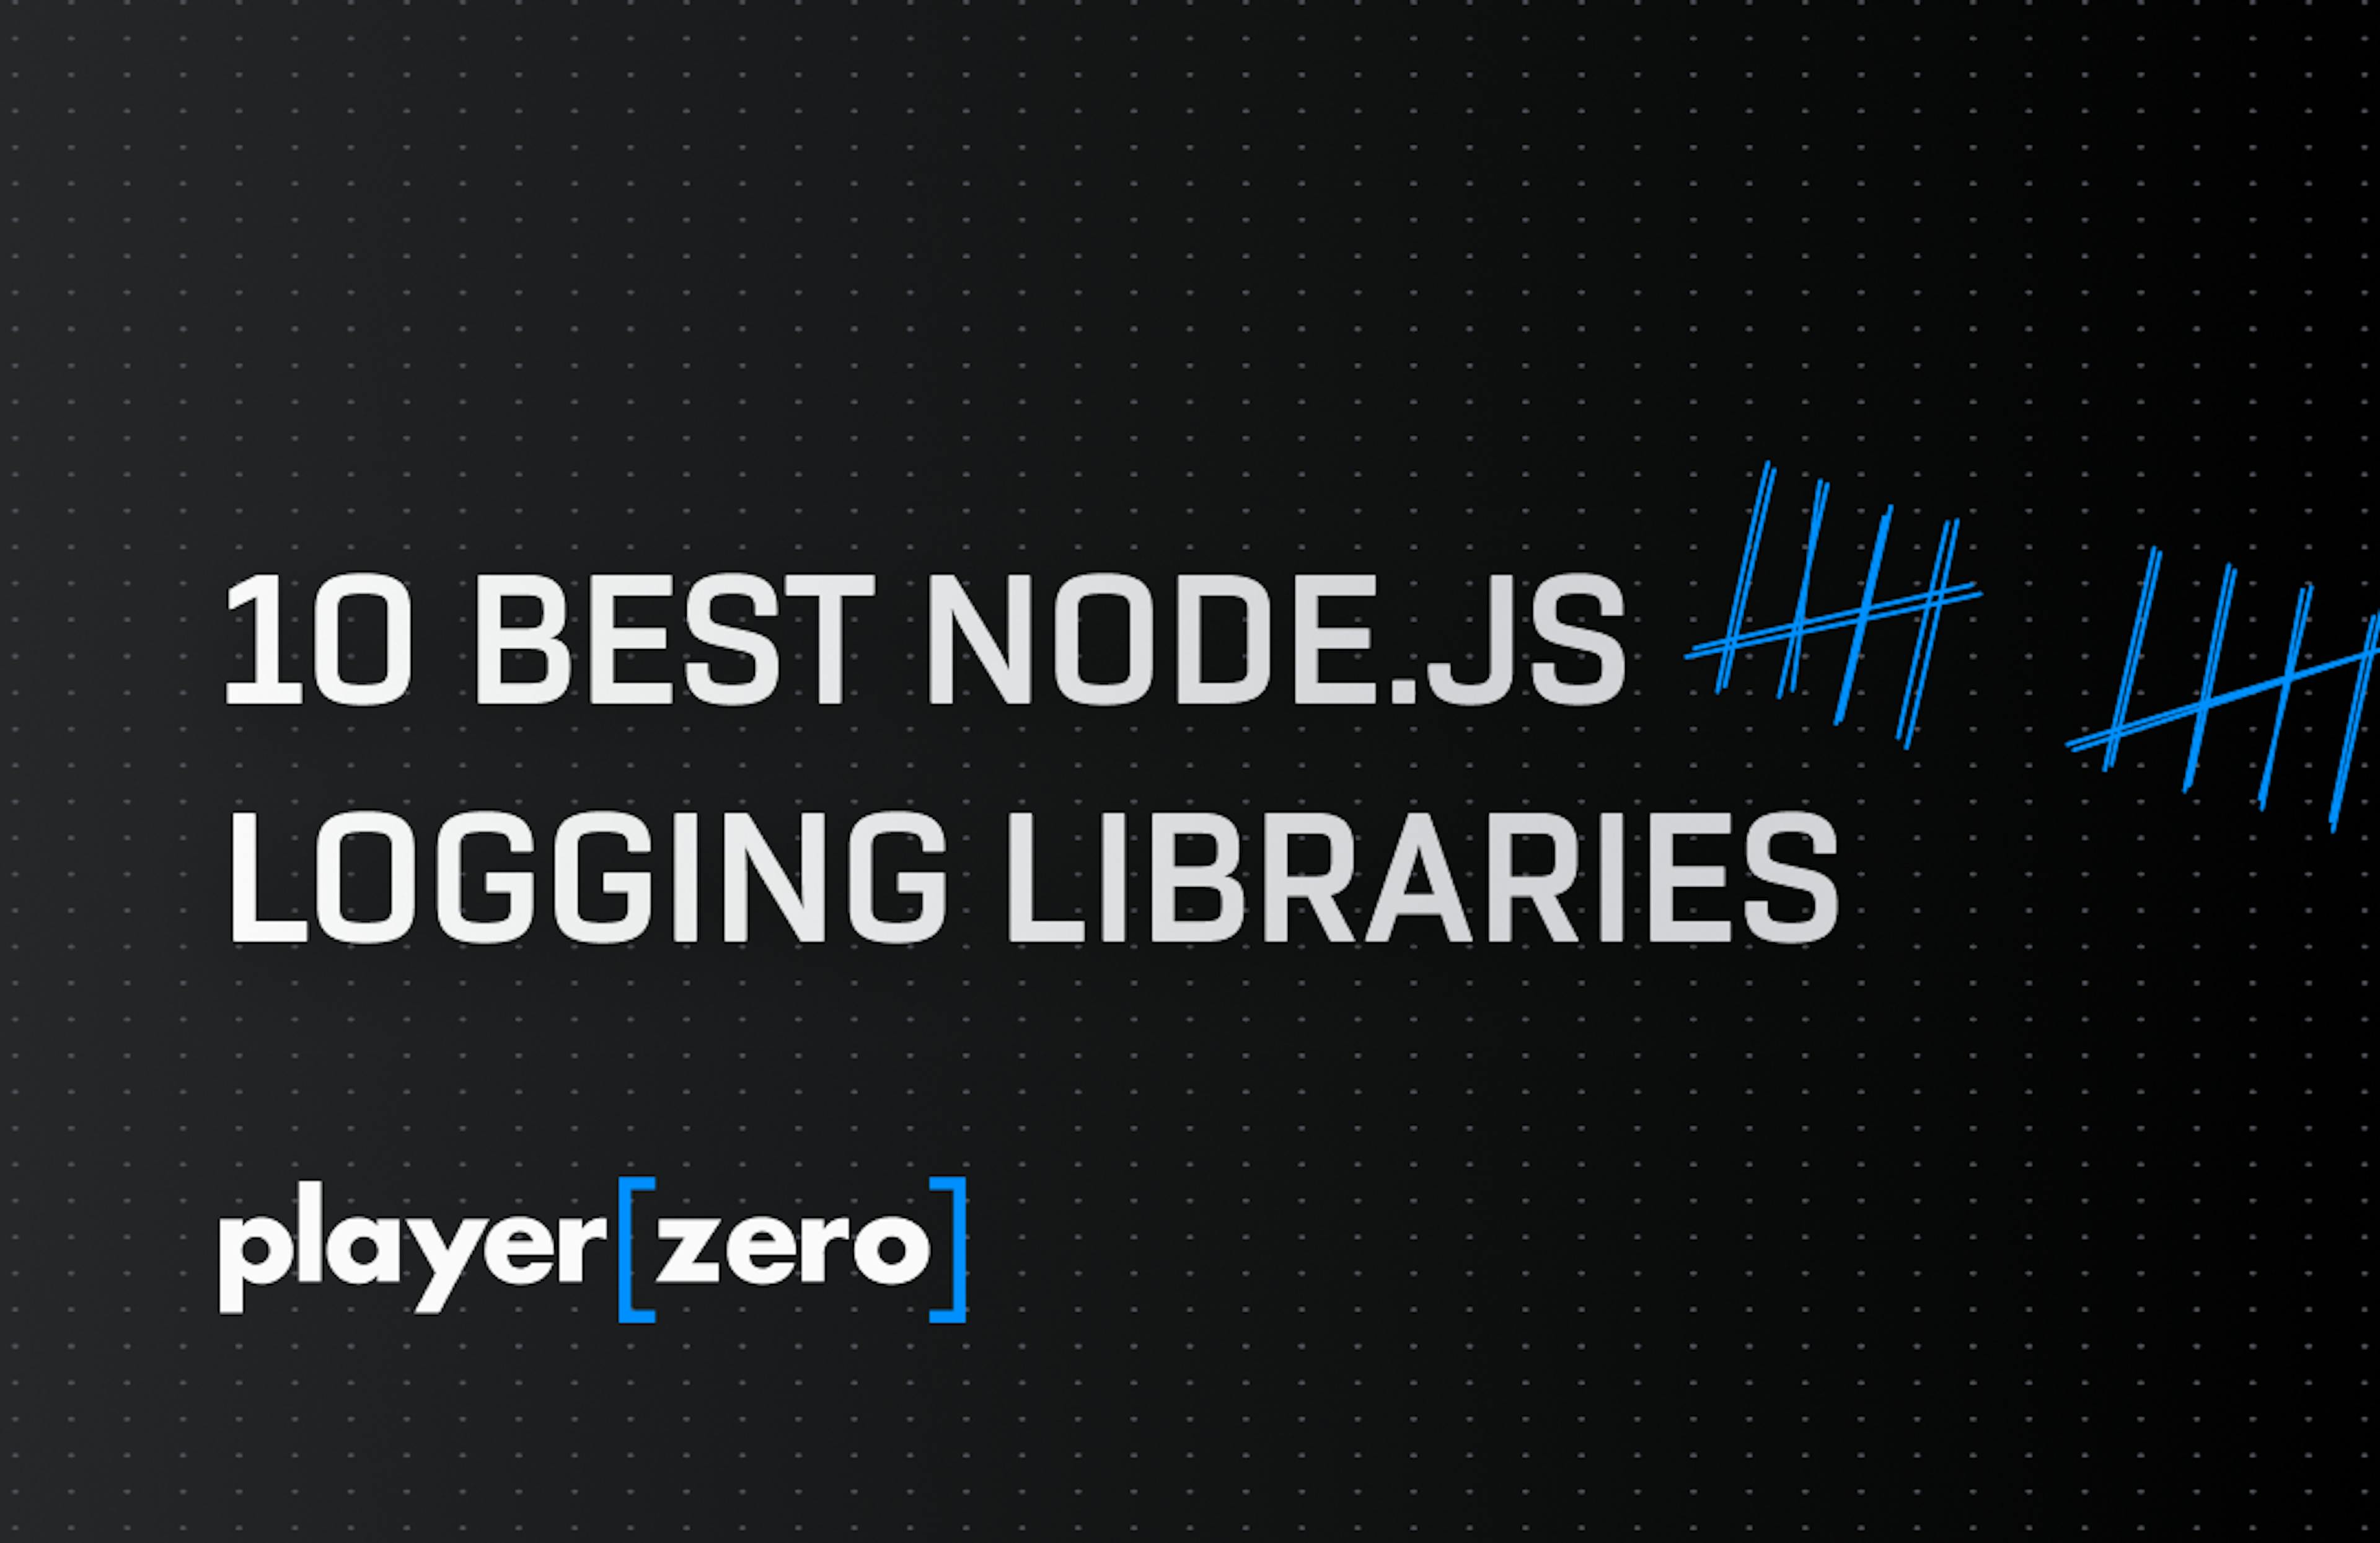 featured image - The 10 Best Node.js Logging Libraries